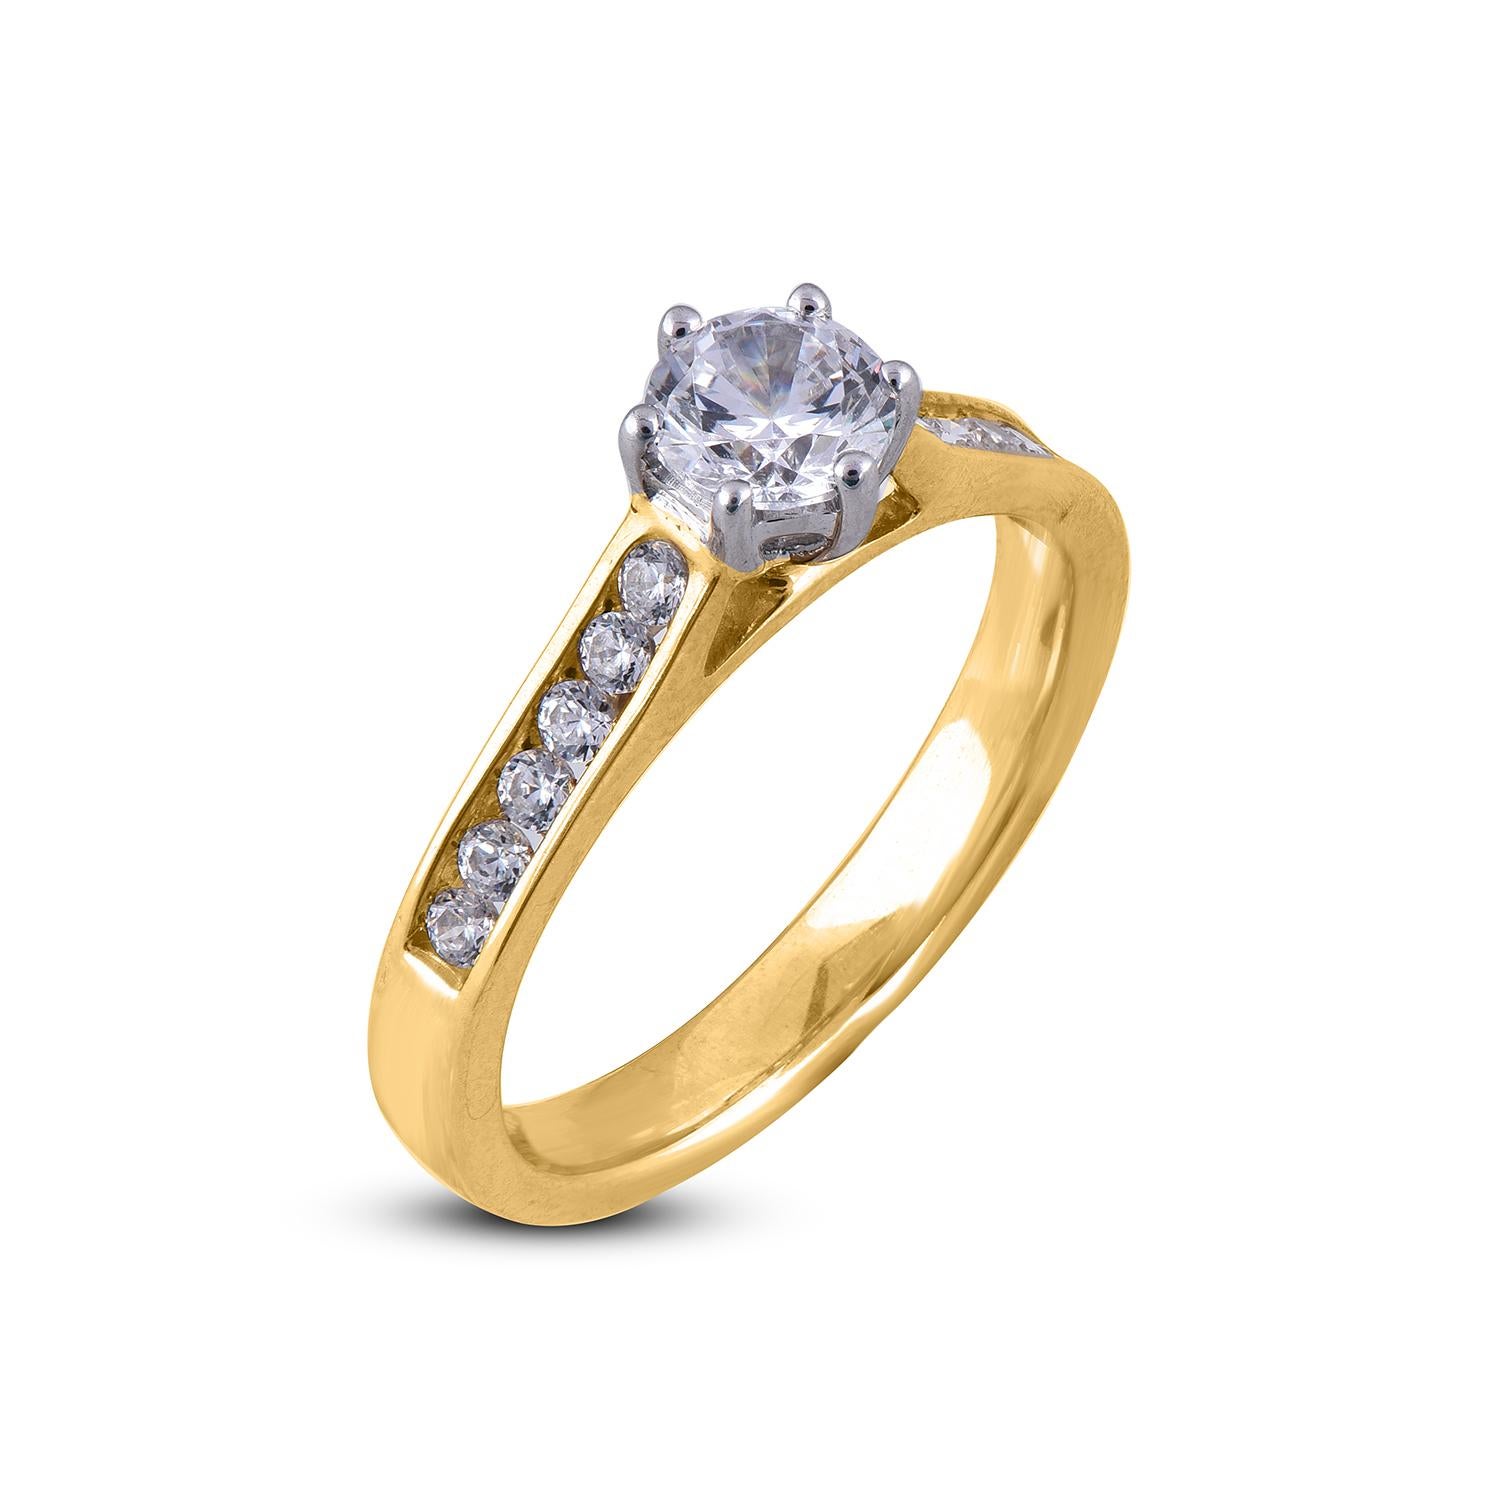 Exquisite diamond bridge accent engagement ring features 0.60 ct centre stone and 0.40 ct of diamond on shank lined diamonds. Expertly Crafted of sparkling 18 karat Yellow gold in high polish finish and set with 13 sparkling round diamonds set in